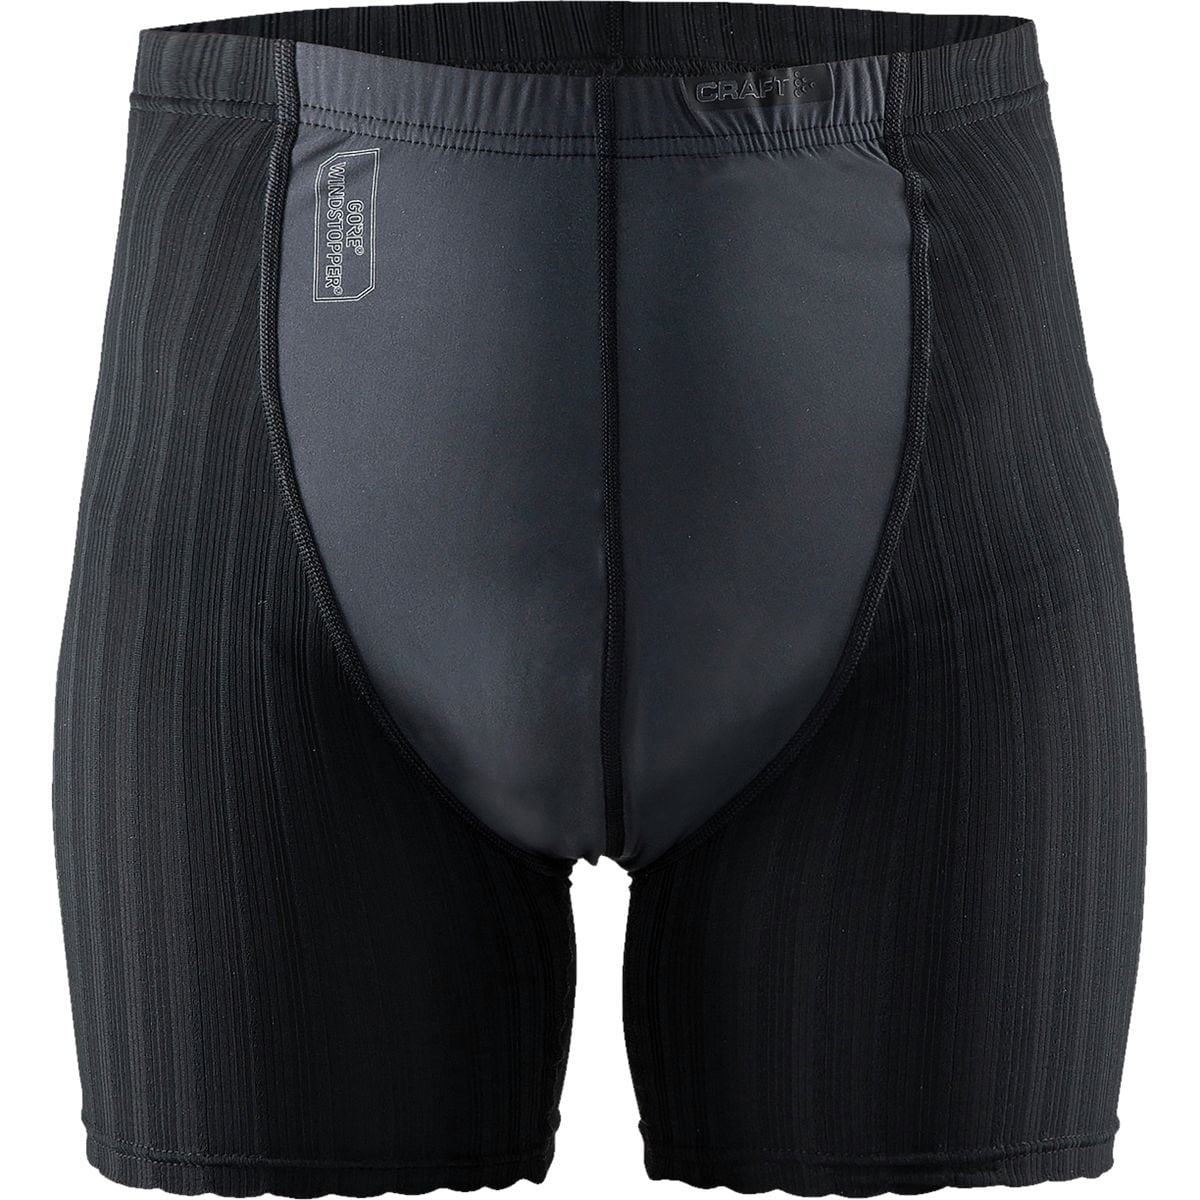 Craft Active Extreme 2.0 Windstopper Boxers - Men's